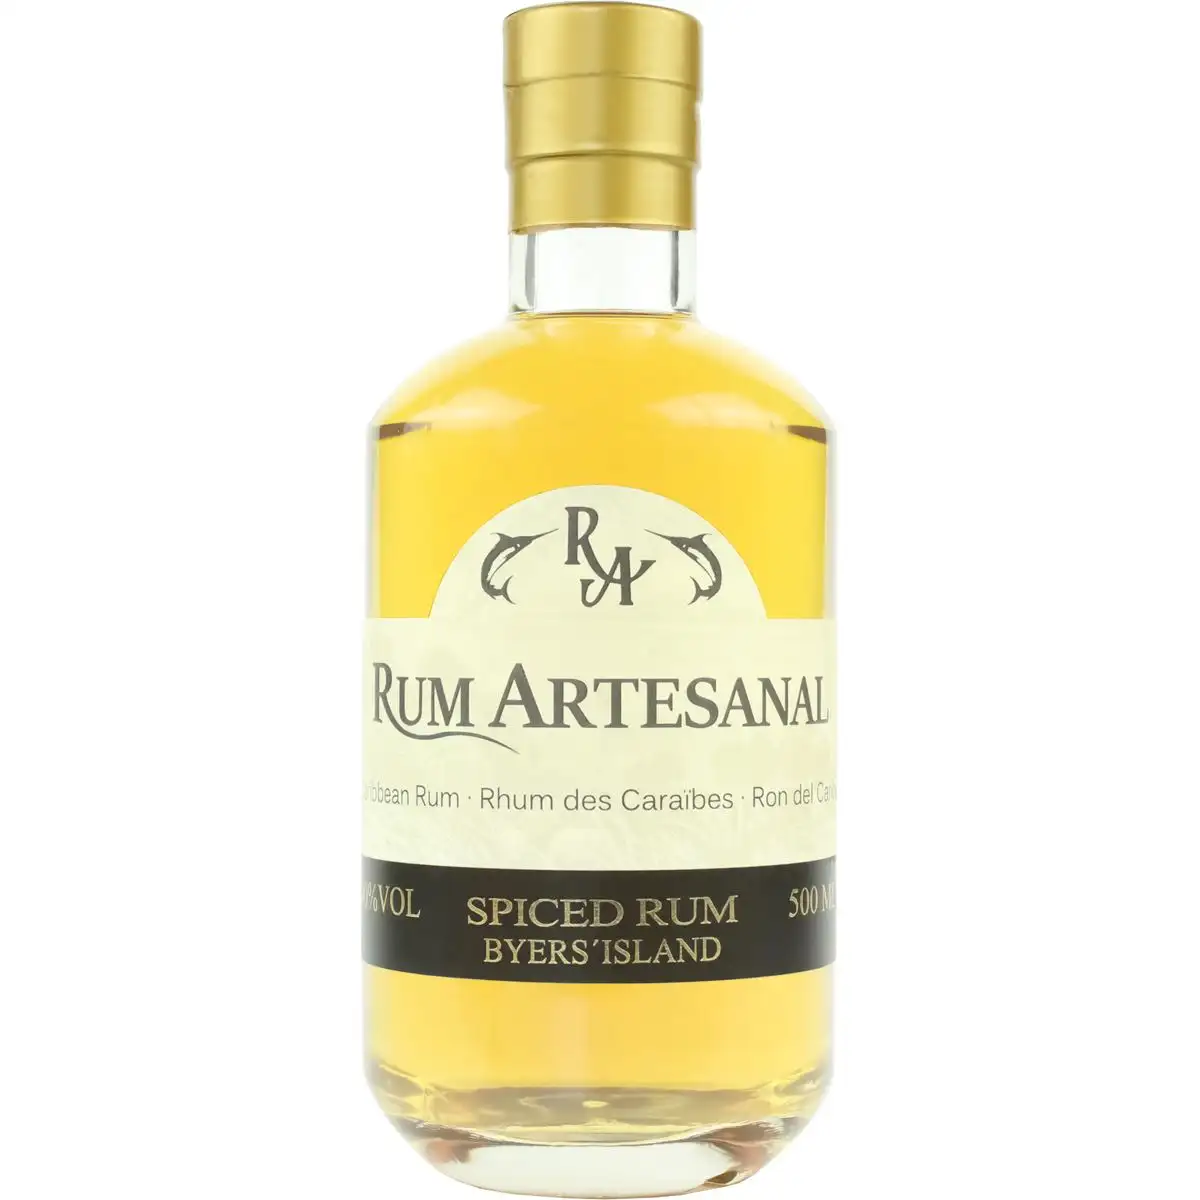 Image of the front of the bottle of the rum Rum Artesanal Spiced Rum Byers‘ Island